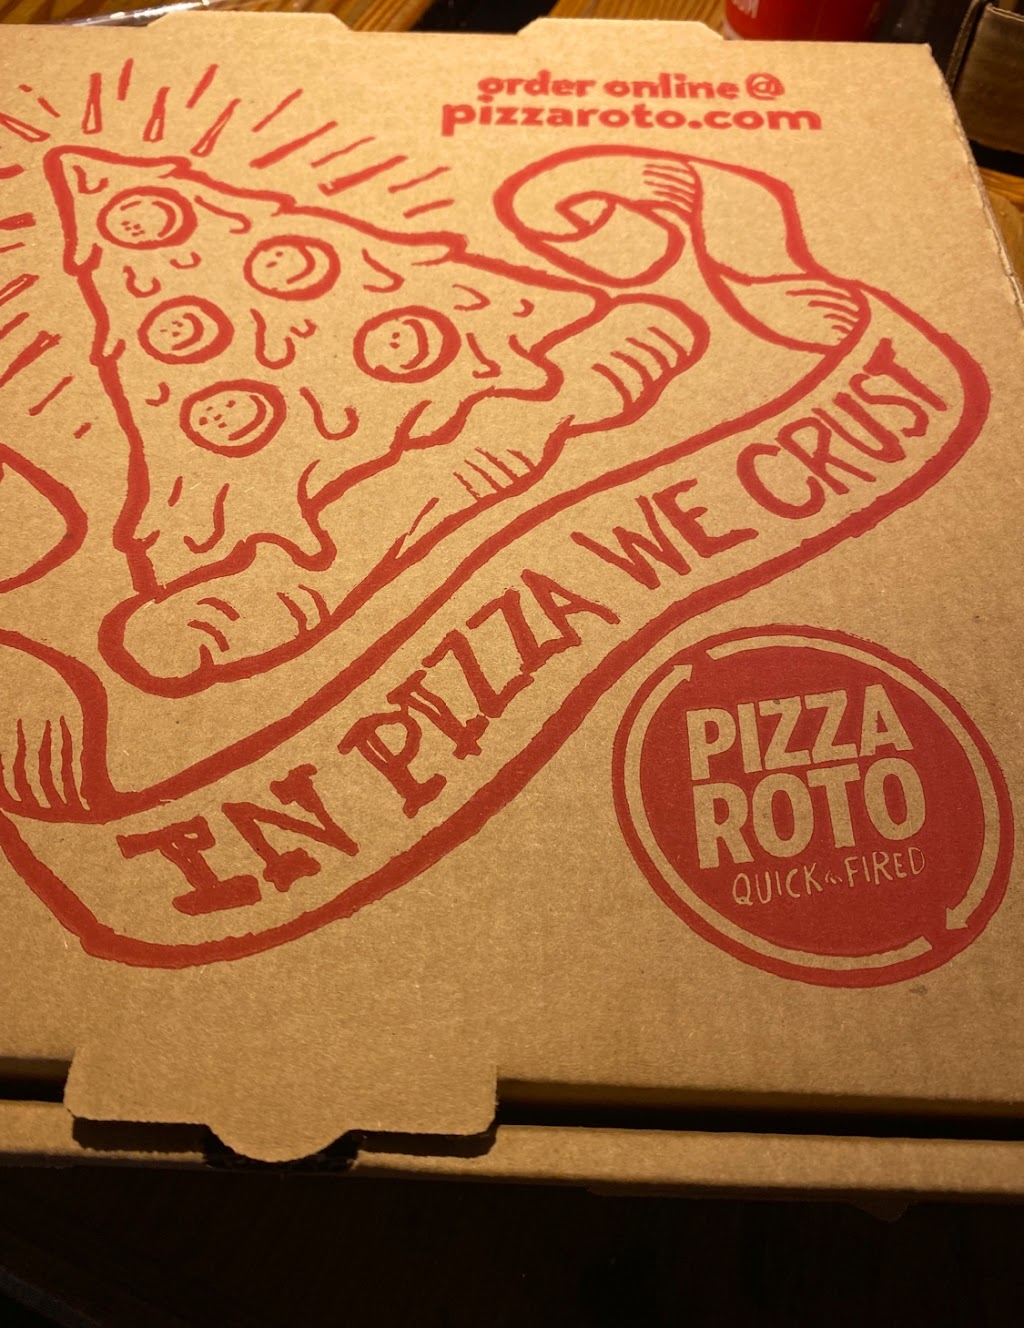 Pizza Roto | 7685 Crile Rd, Painesville, OH 44077 | Phone: (440) 754-8731